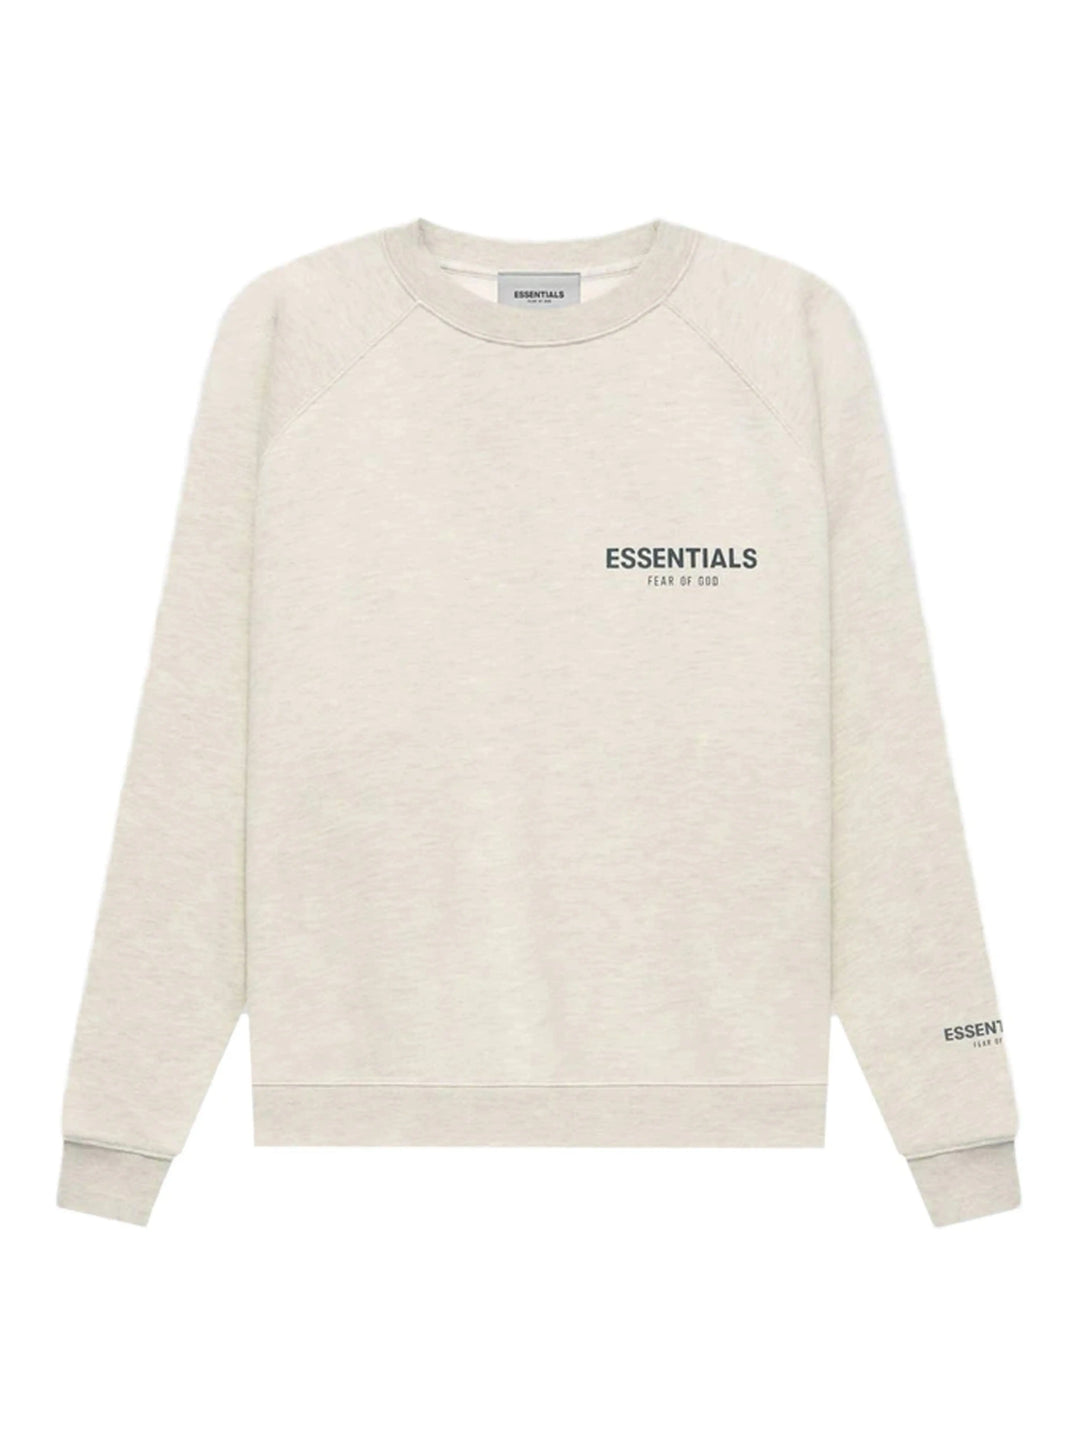 Fear Of God Essentials Core Collection Crewneck Light Heather Oatmeal [FW21] [FACTORY FLAW] Prior